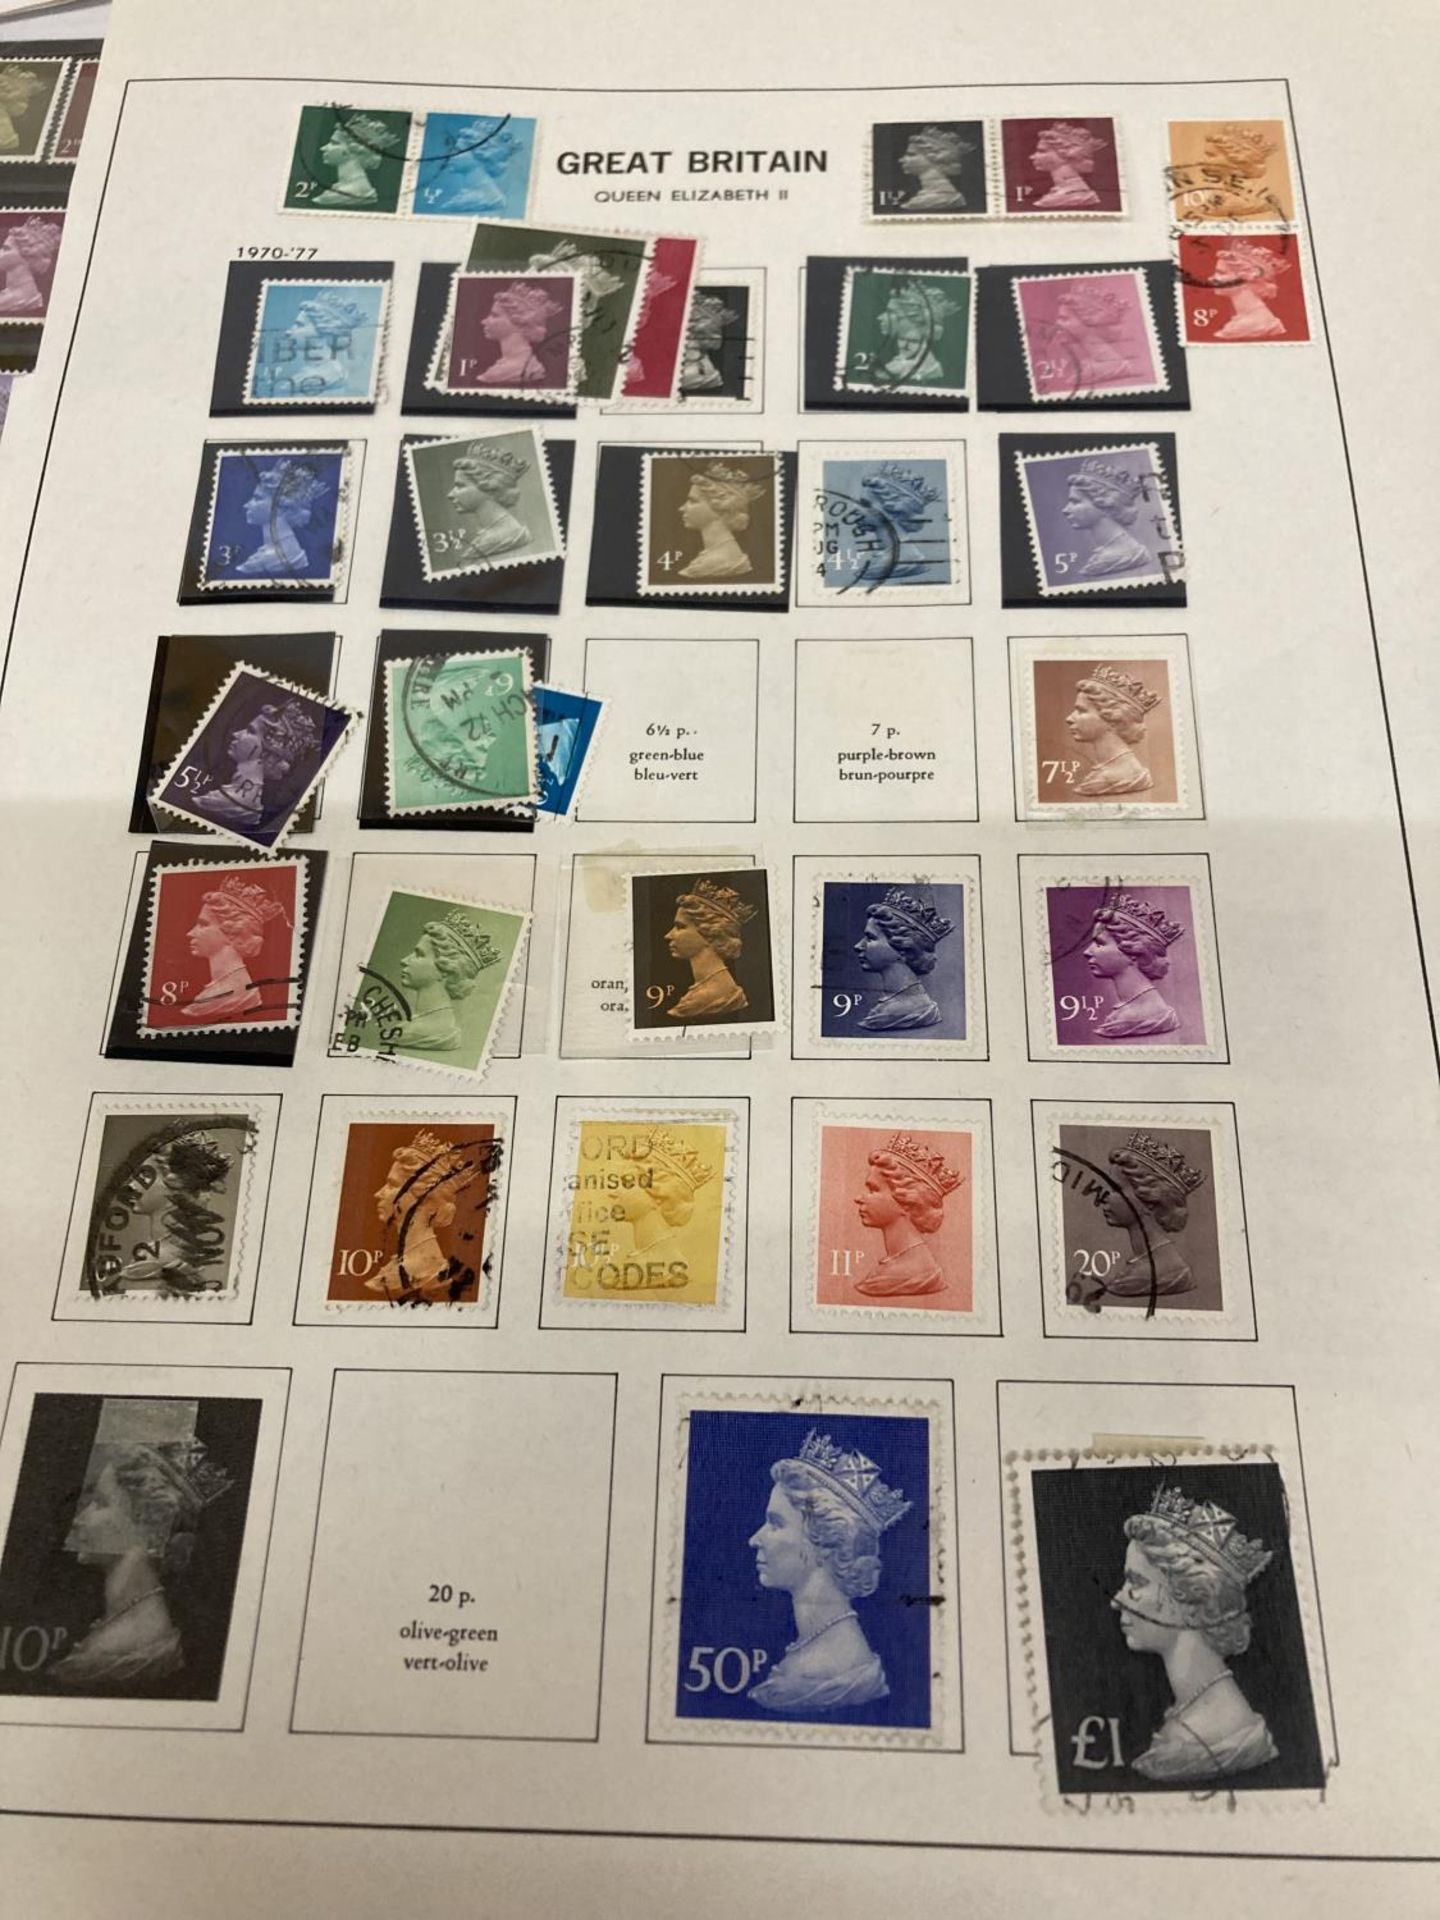 TEN PLUS SHEETS CONTAINING STAMPS FROM GREAT BRITAIN - Image 2 of 7